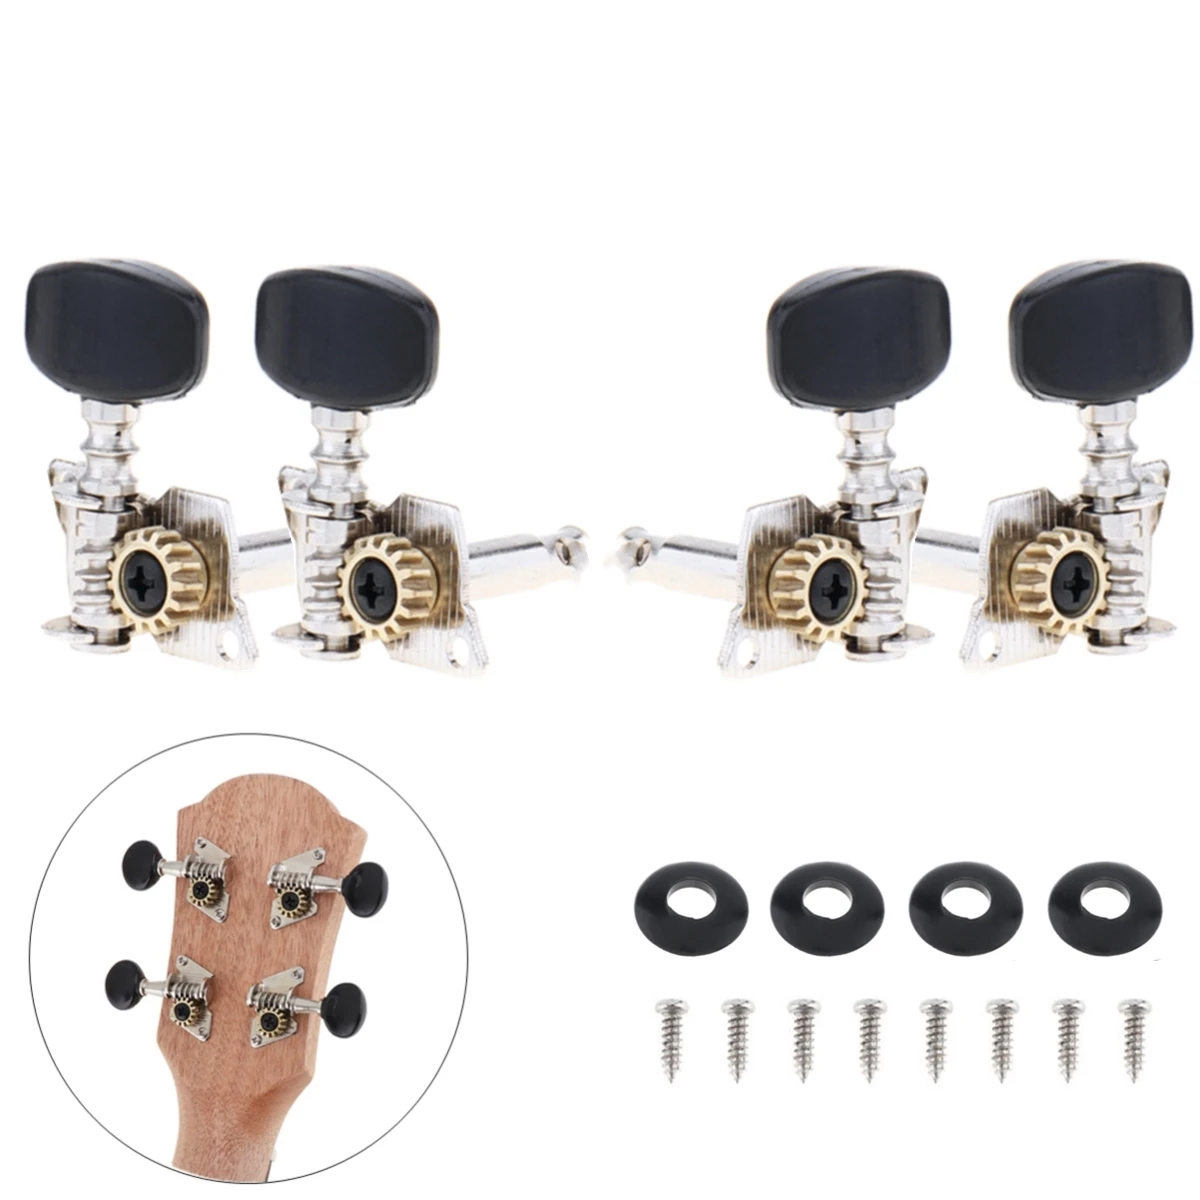 

4pcs Ukulele Tuning Pegs 2R+2L Steel 4 String Guitar Machine Heads Locking Tuners for 21 23 26 Inch Ukelele Replacement Parts